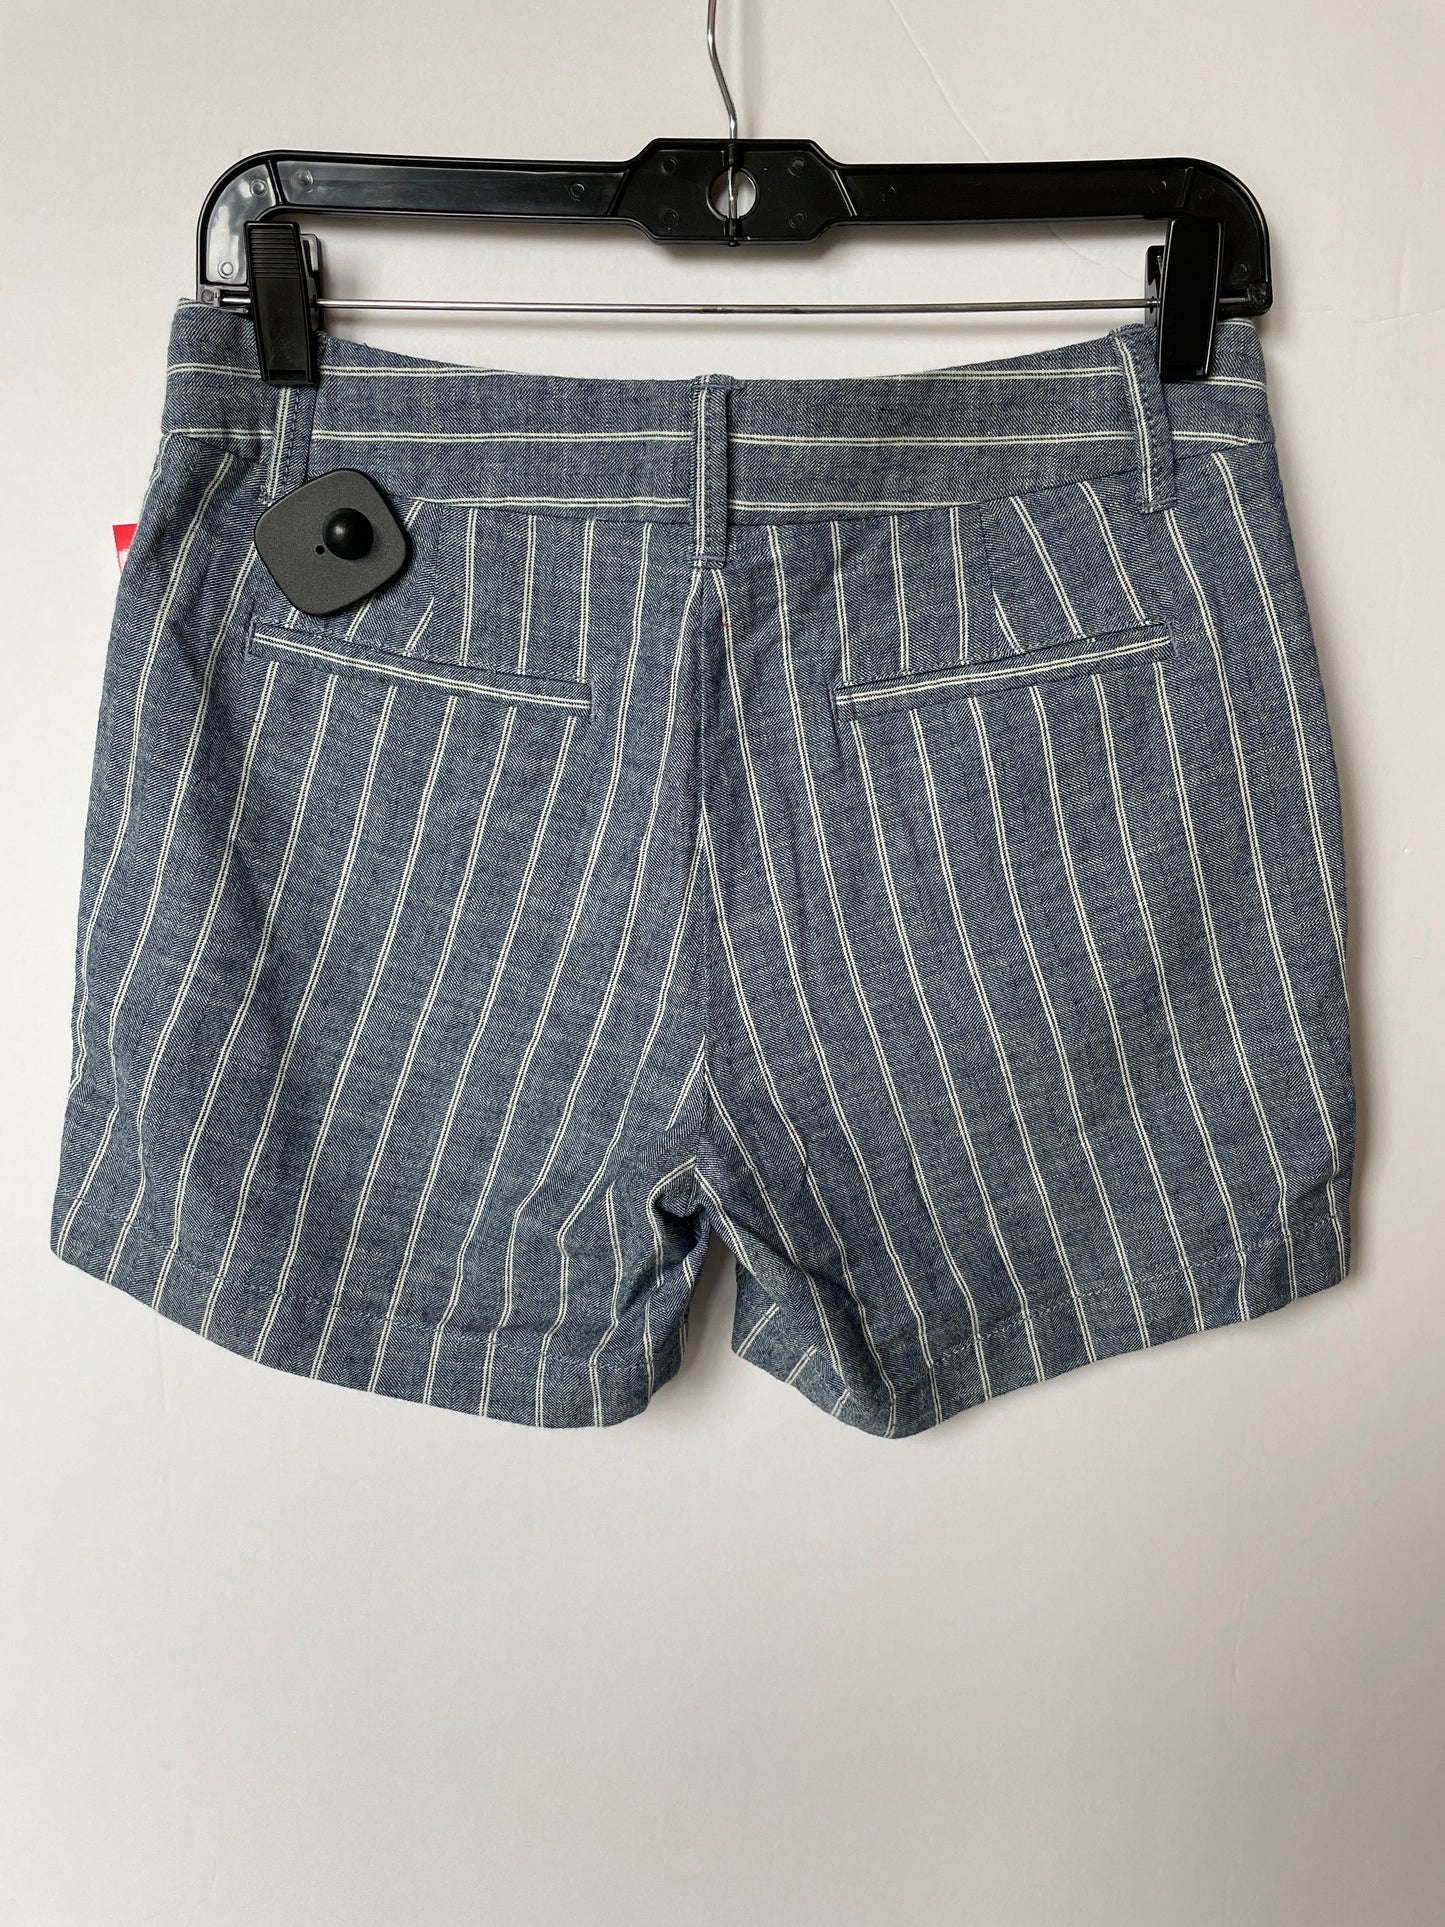 Shorts By J Crew  Size: 0